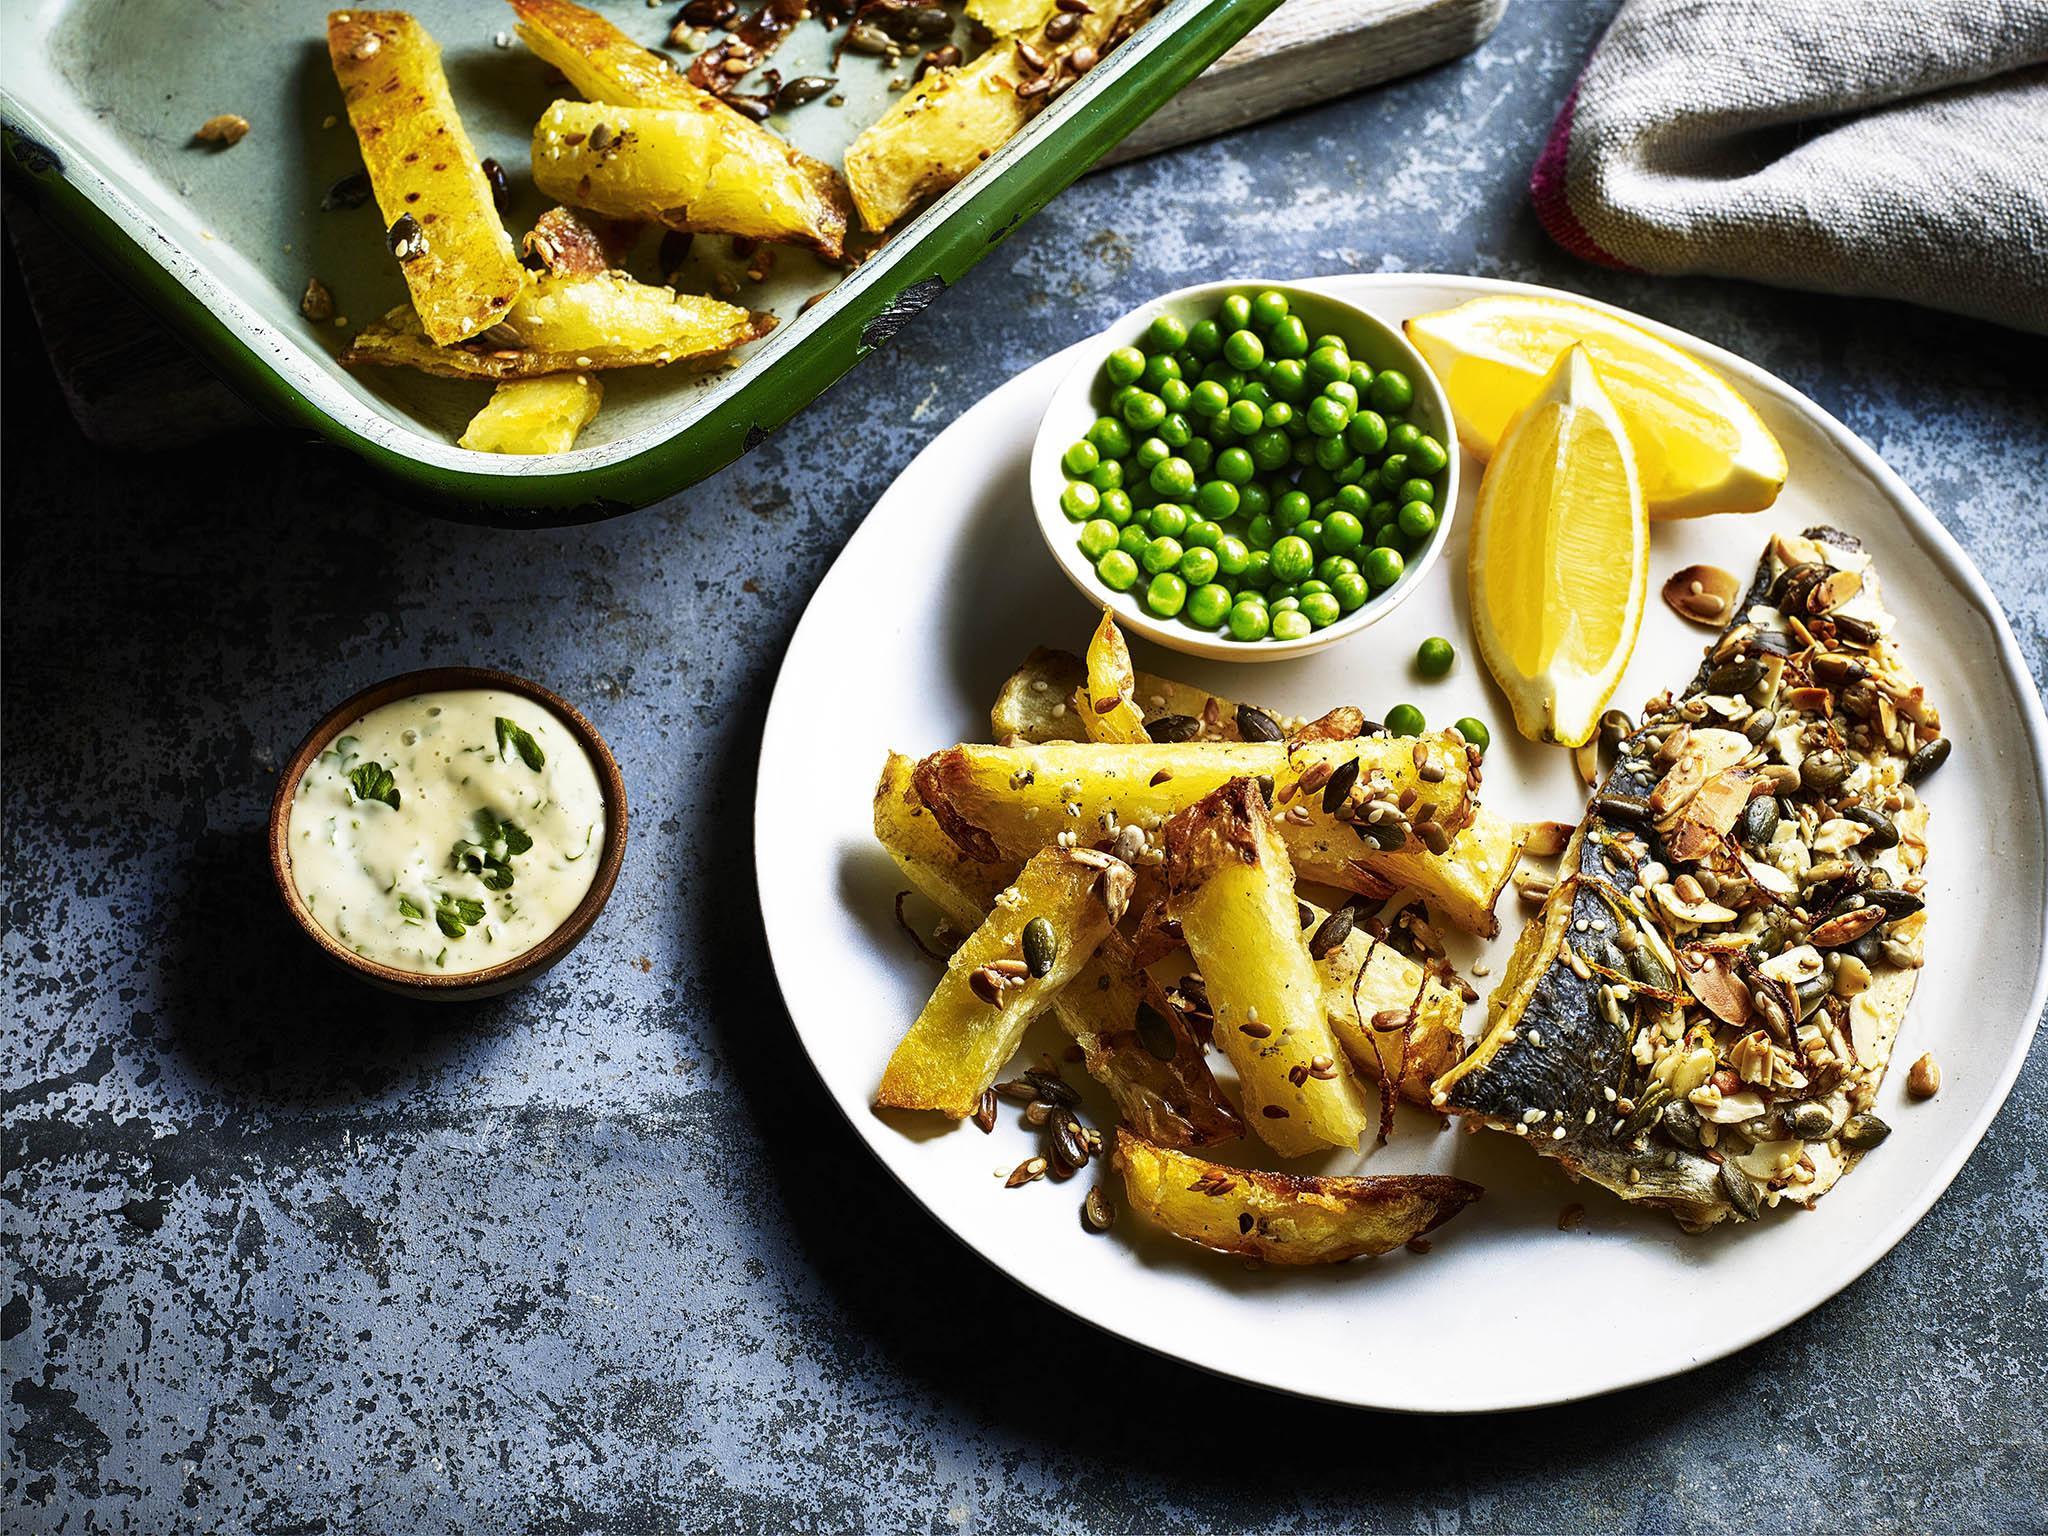 Give peas a chance: a nutritious twist on a British classic